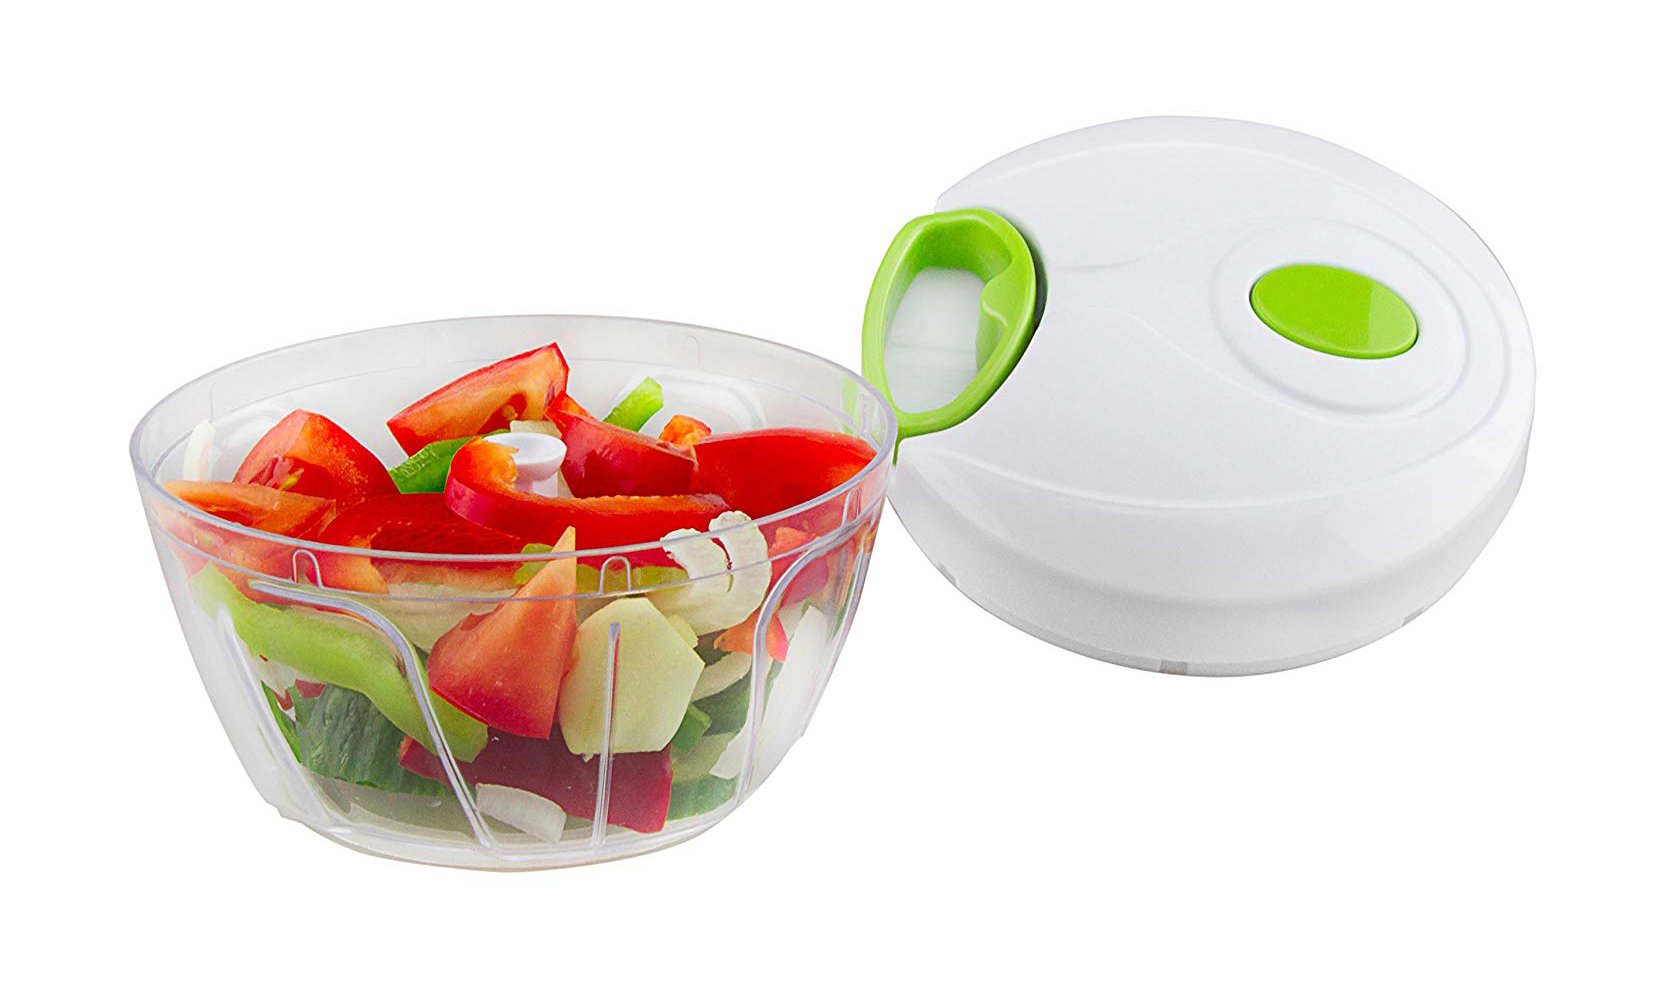 Compact & Powerful Hand Held Vegetable and Fruit Chopper and Slicer